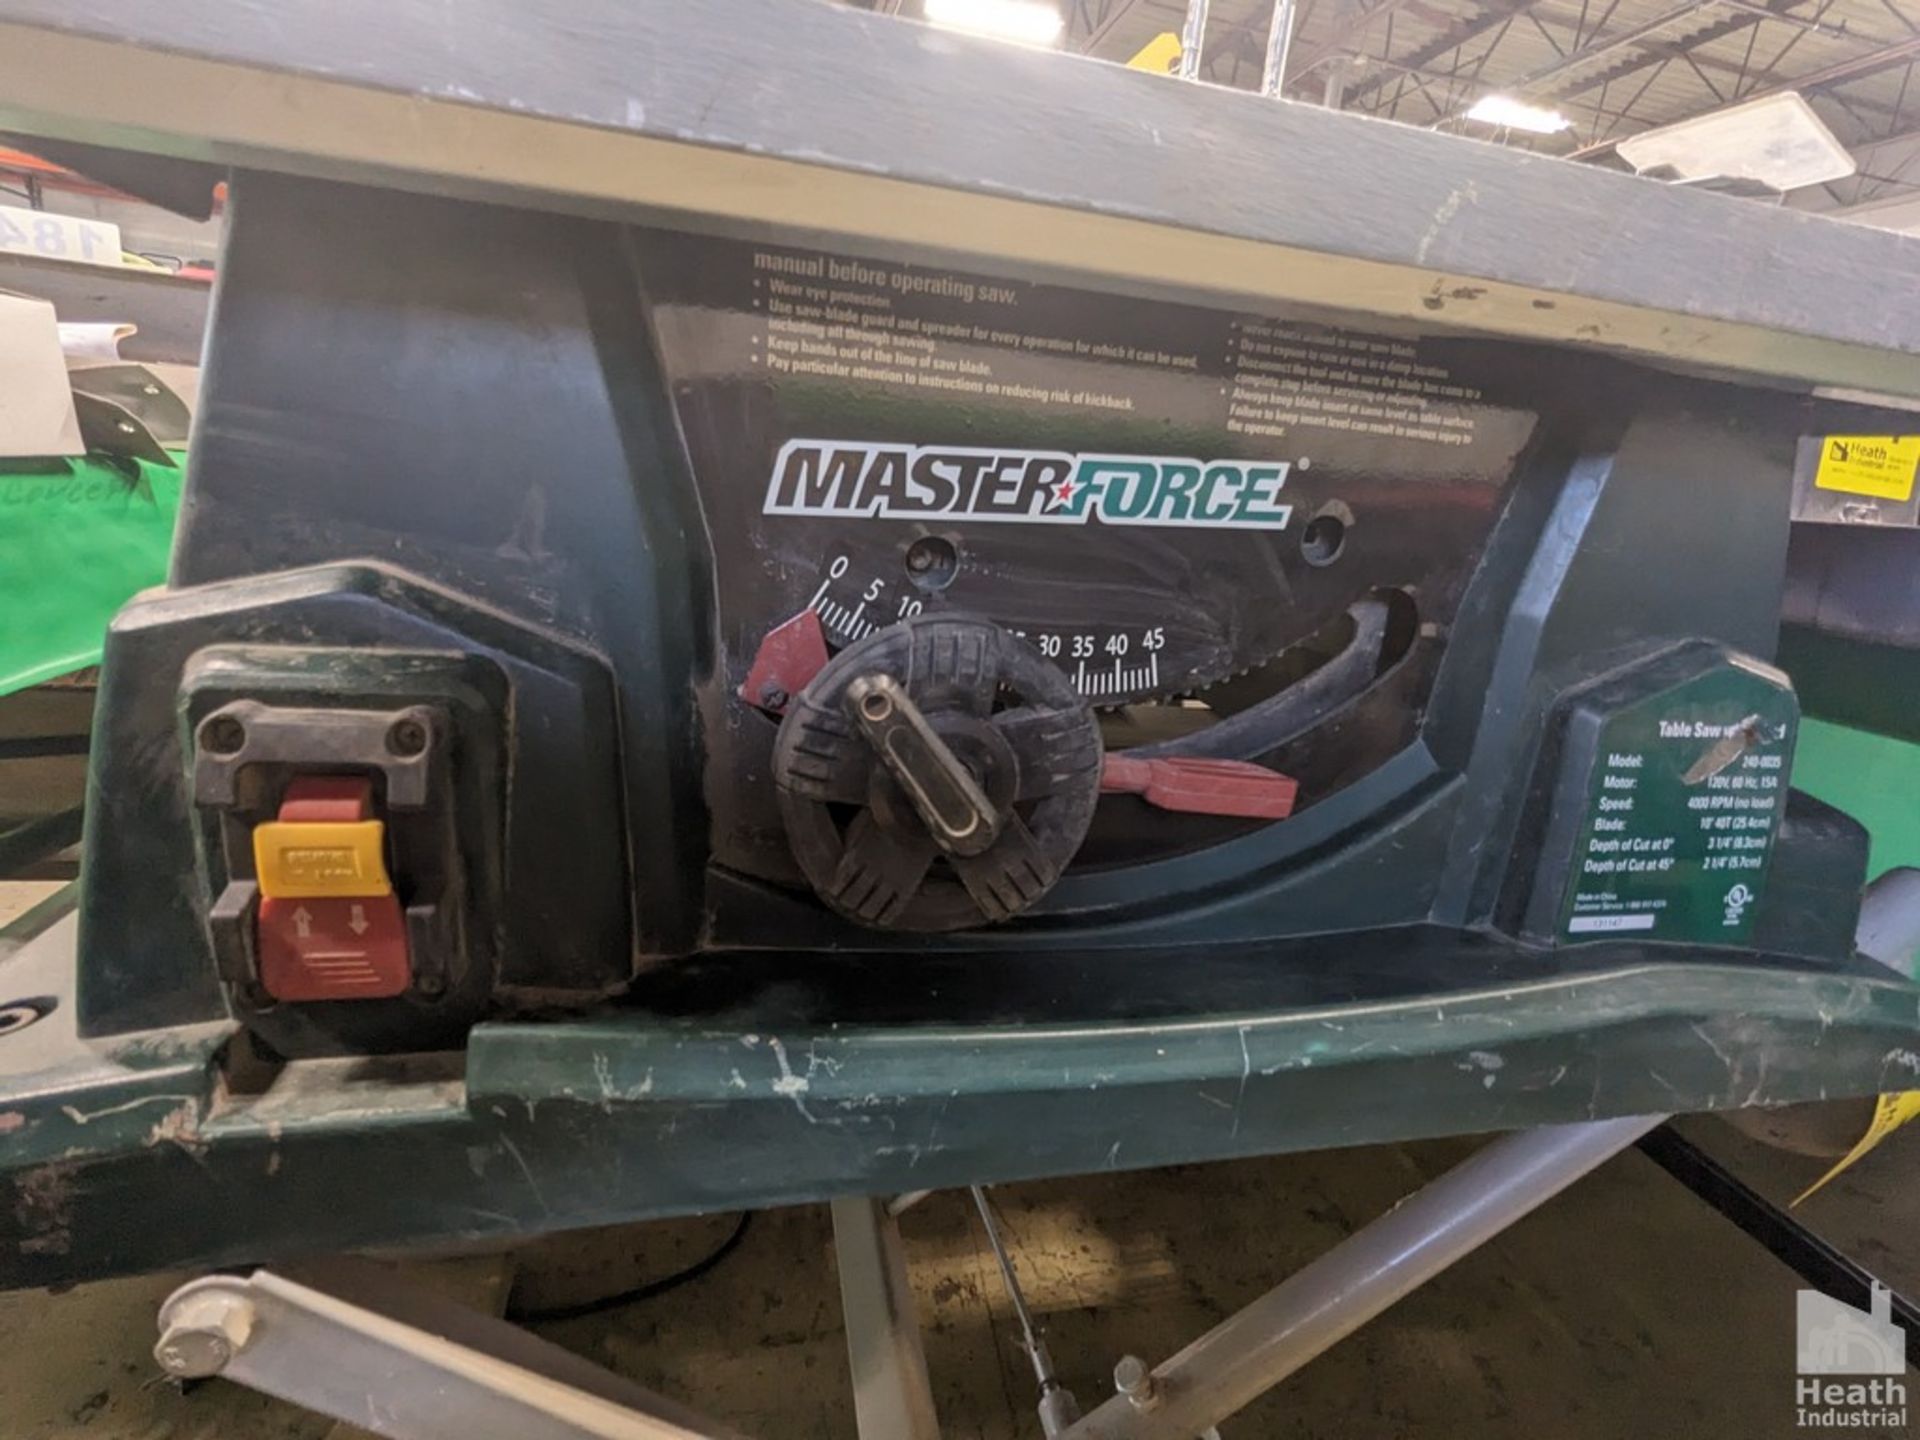 MASTERFORCE MODEL 240-0035 10" PORTABLE TABLE SAW WITH STAND - Image 3 of 4